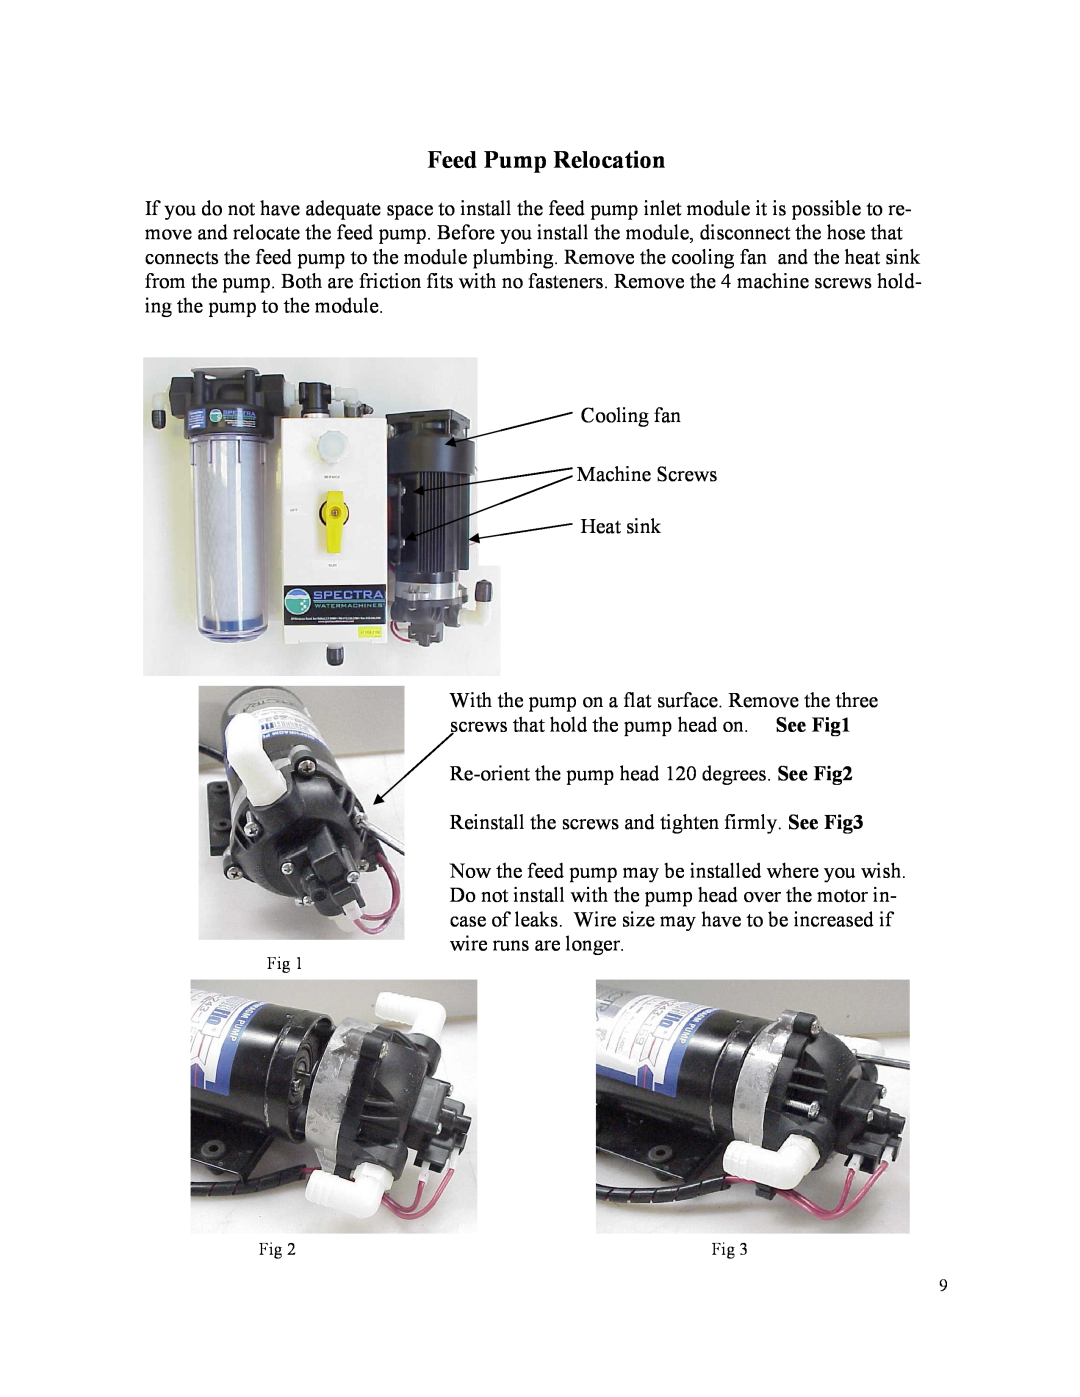 Spectra Watermakers MPC-5000 owner manual Feed Pump Relocation 